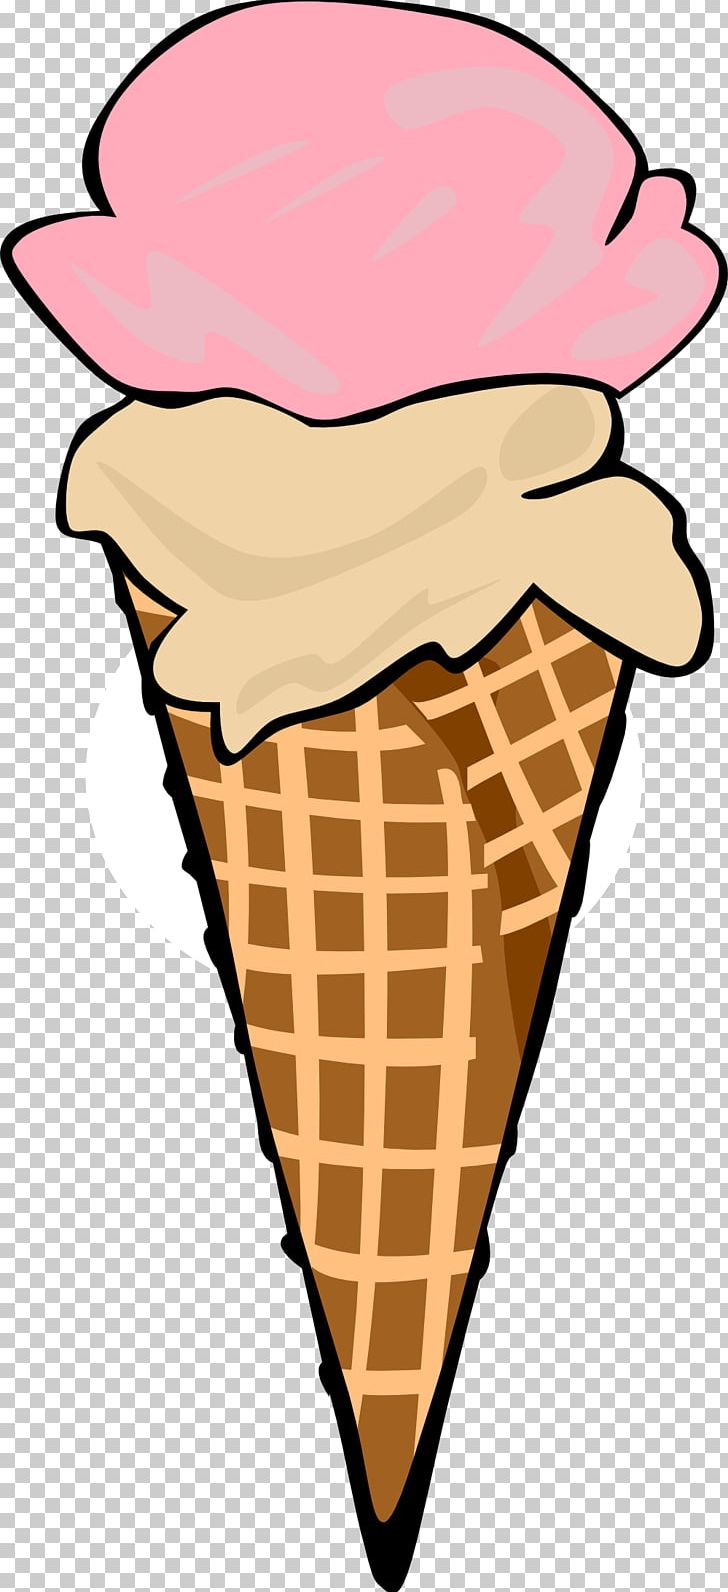 Ice Cream Cone Sundae Chocolate Ice Cream PNG, Clipart, Chocolate Ice Cream, Cream, Dessert, Dondurma, Food Free PNG Download